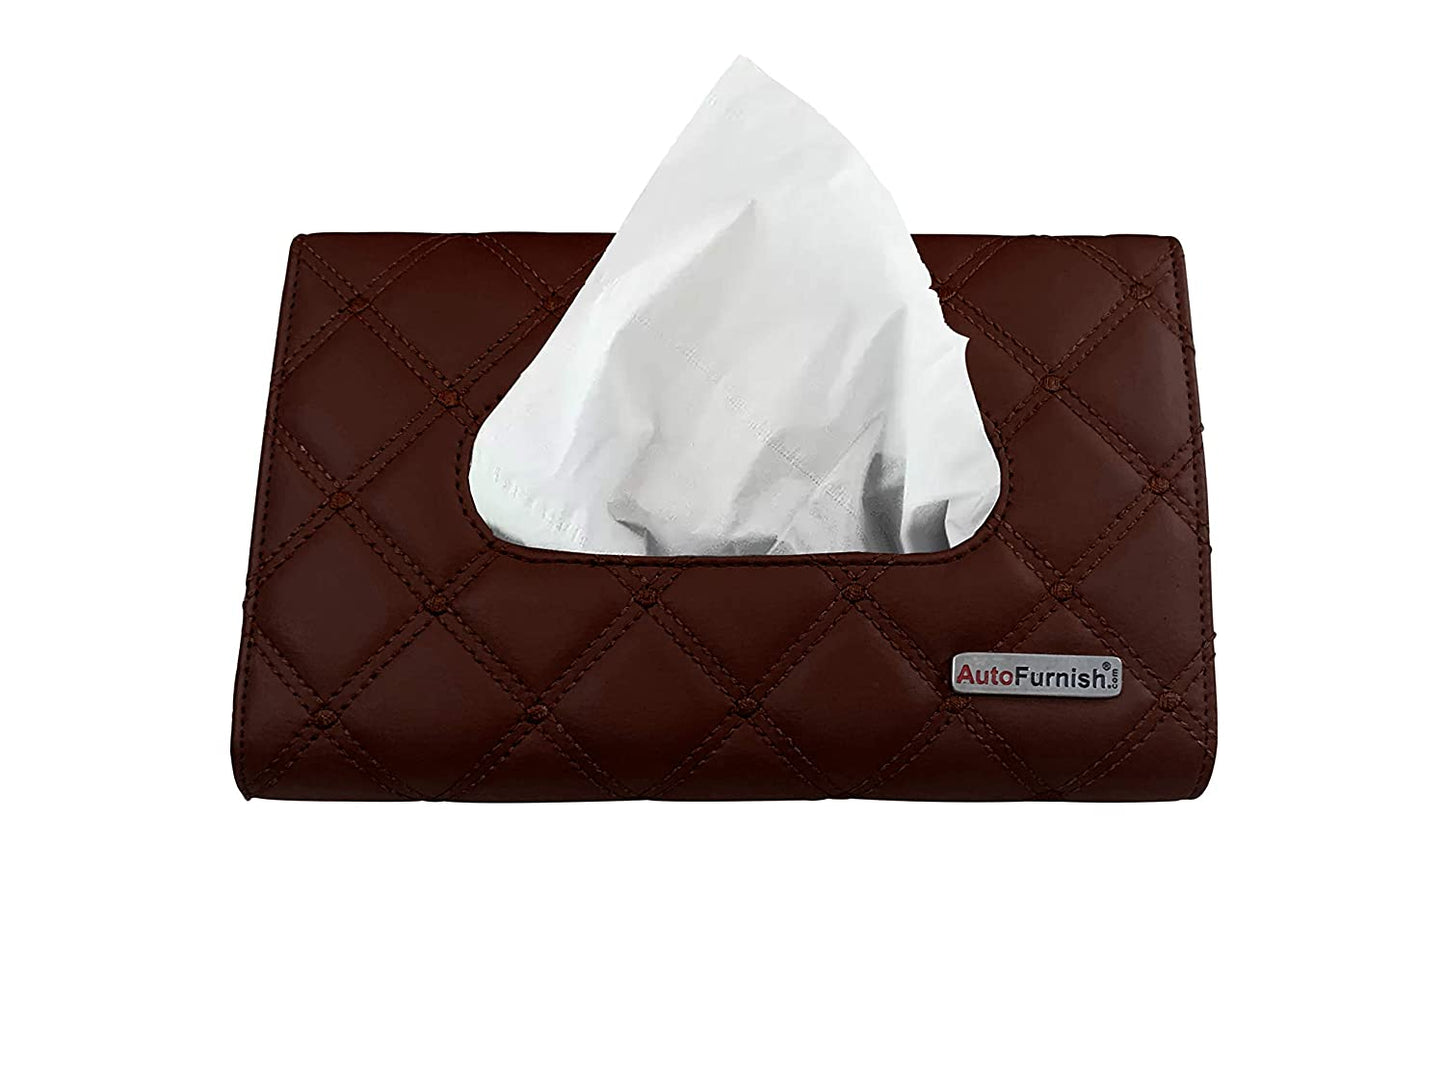 7D PREMIUM Sun Visor Tissue Box Holder | Water Resistant PU Leather with Straps and 50 Free Tissues